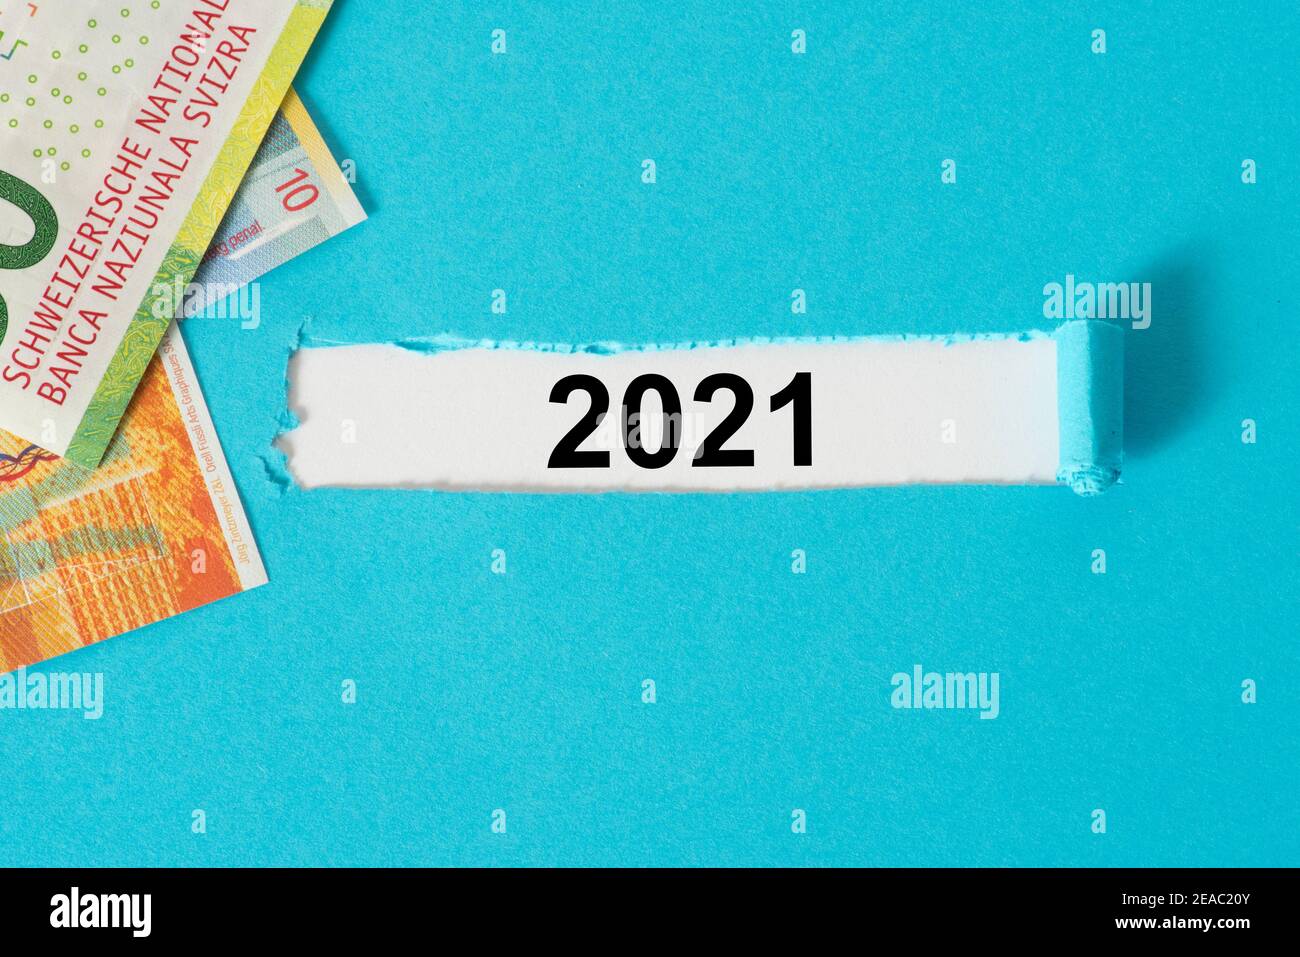 Money Swiss Francs and the year 2021 Stock Photo